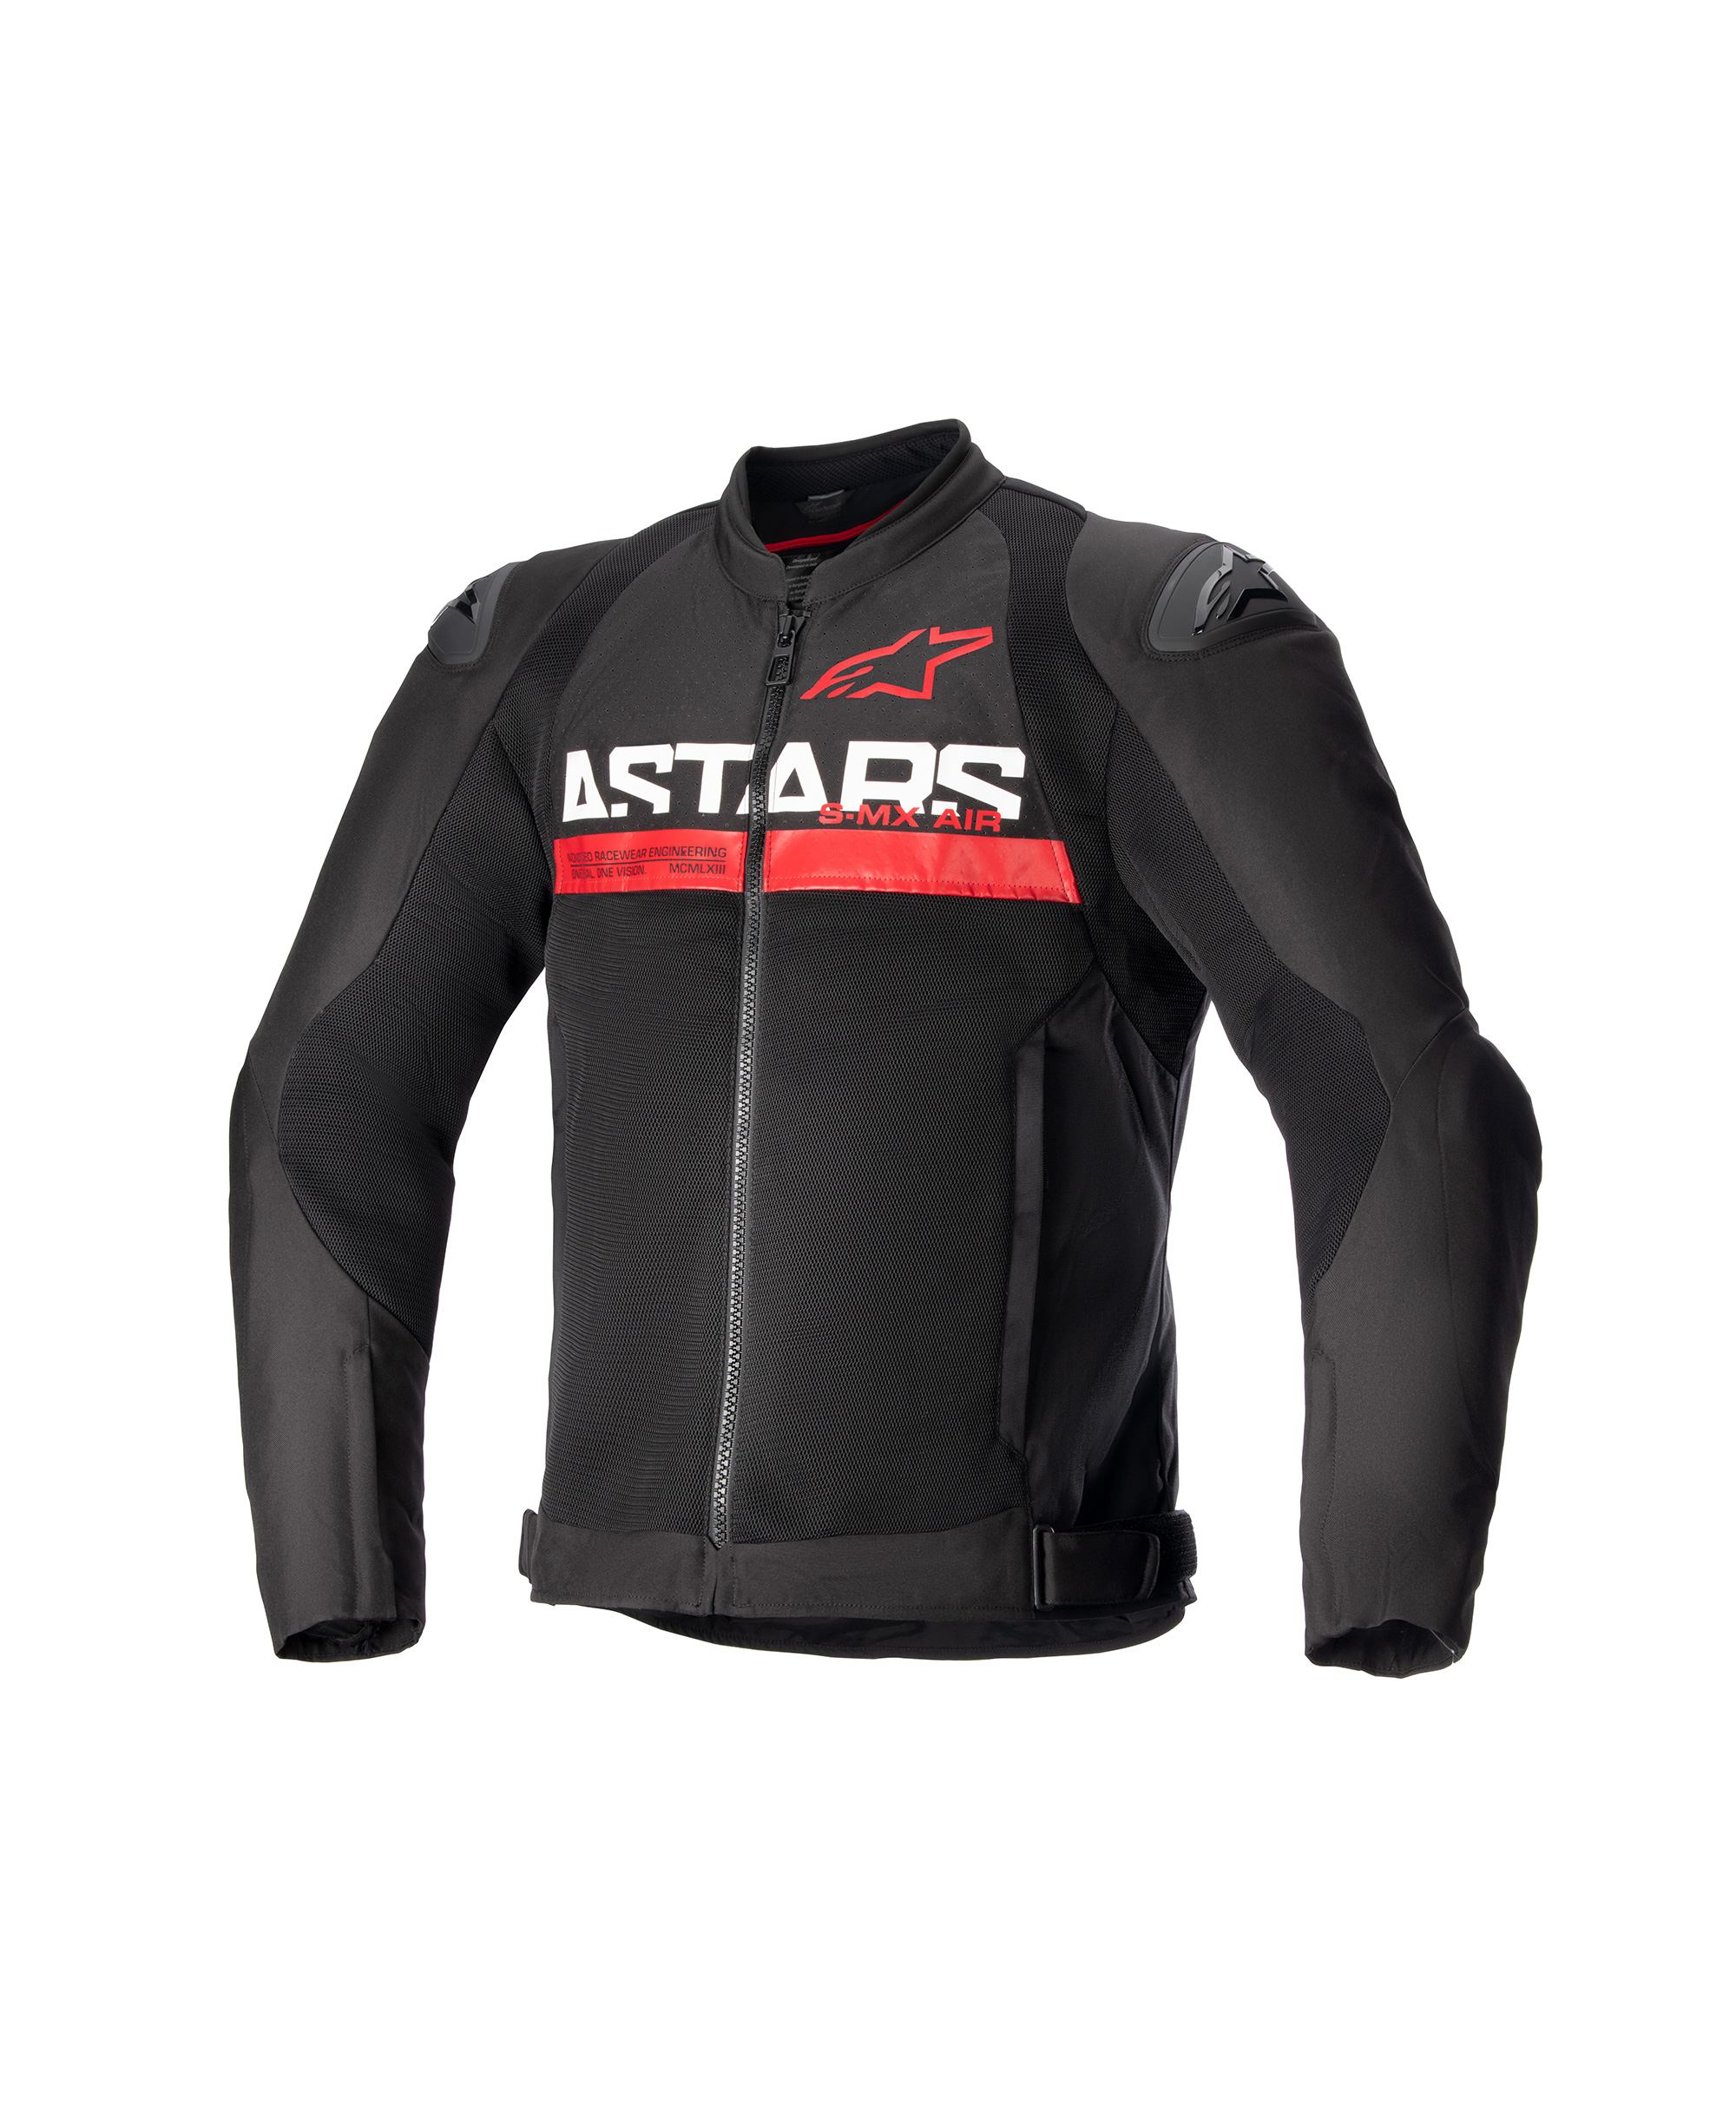 SMX AIR JACKET BLACK BRIGHT RED